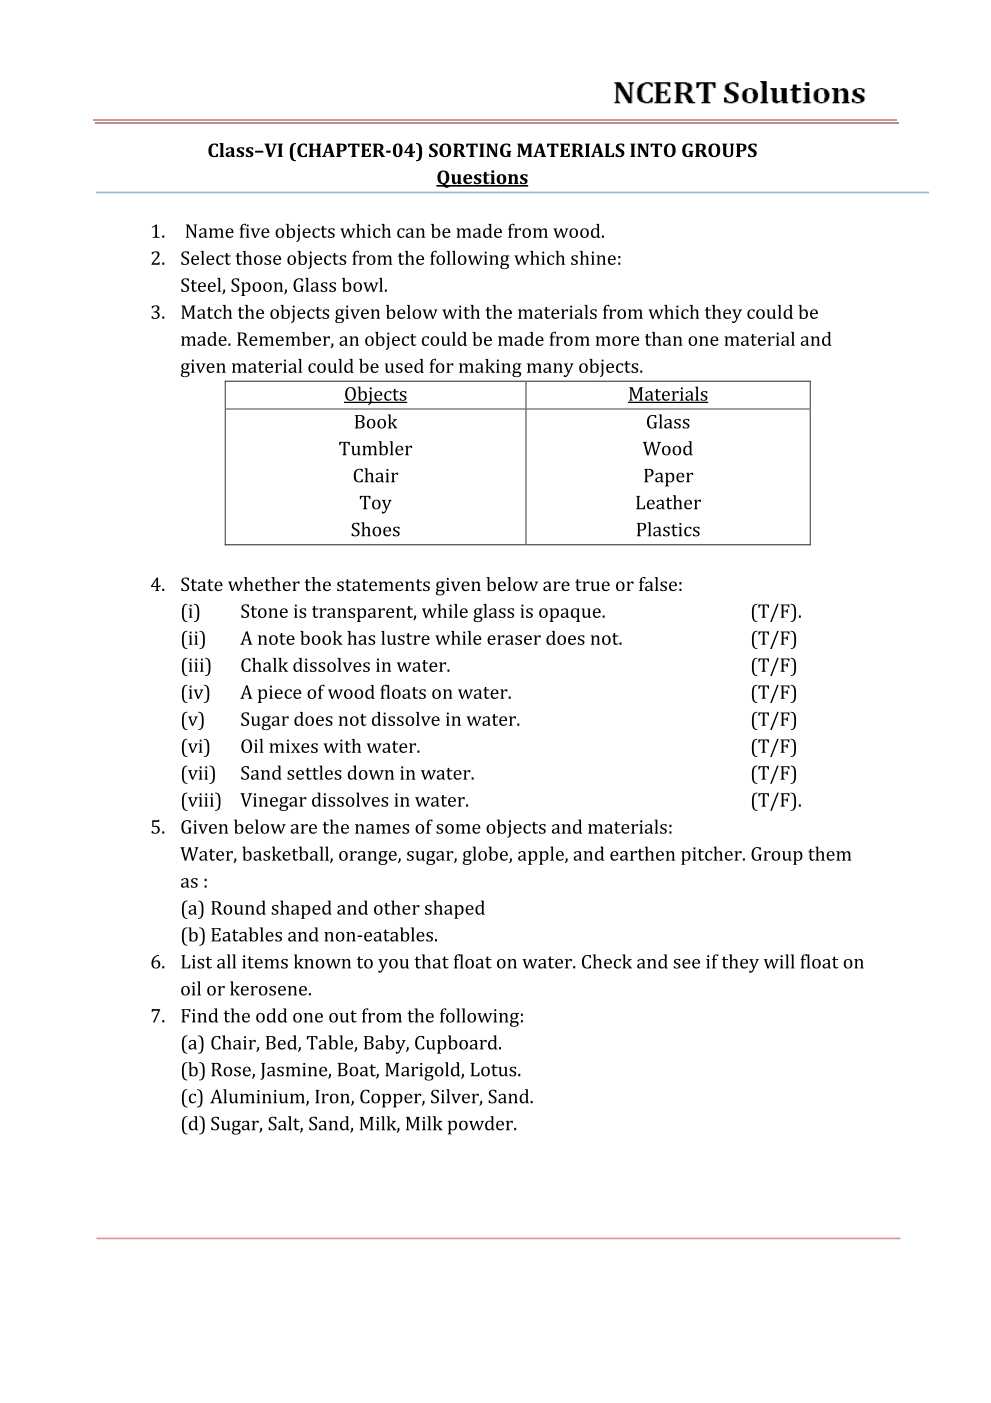 NCERT Solutions For Class 6 Science Chapter 4